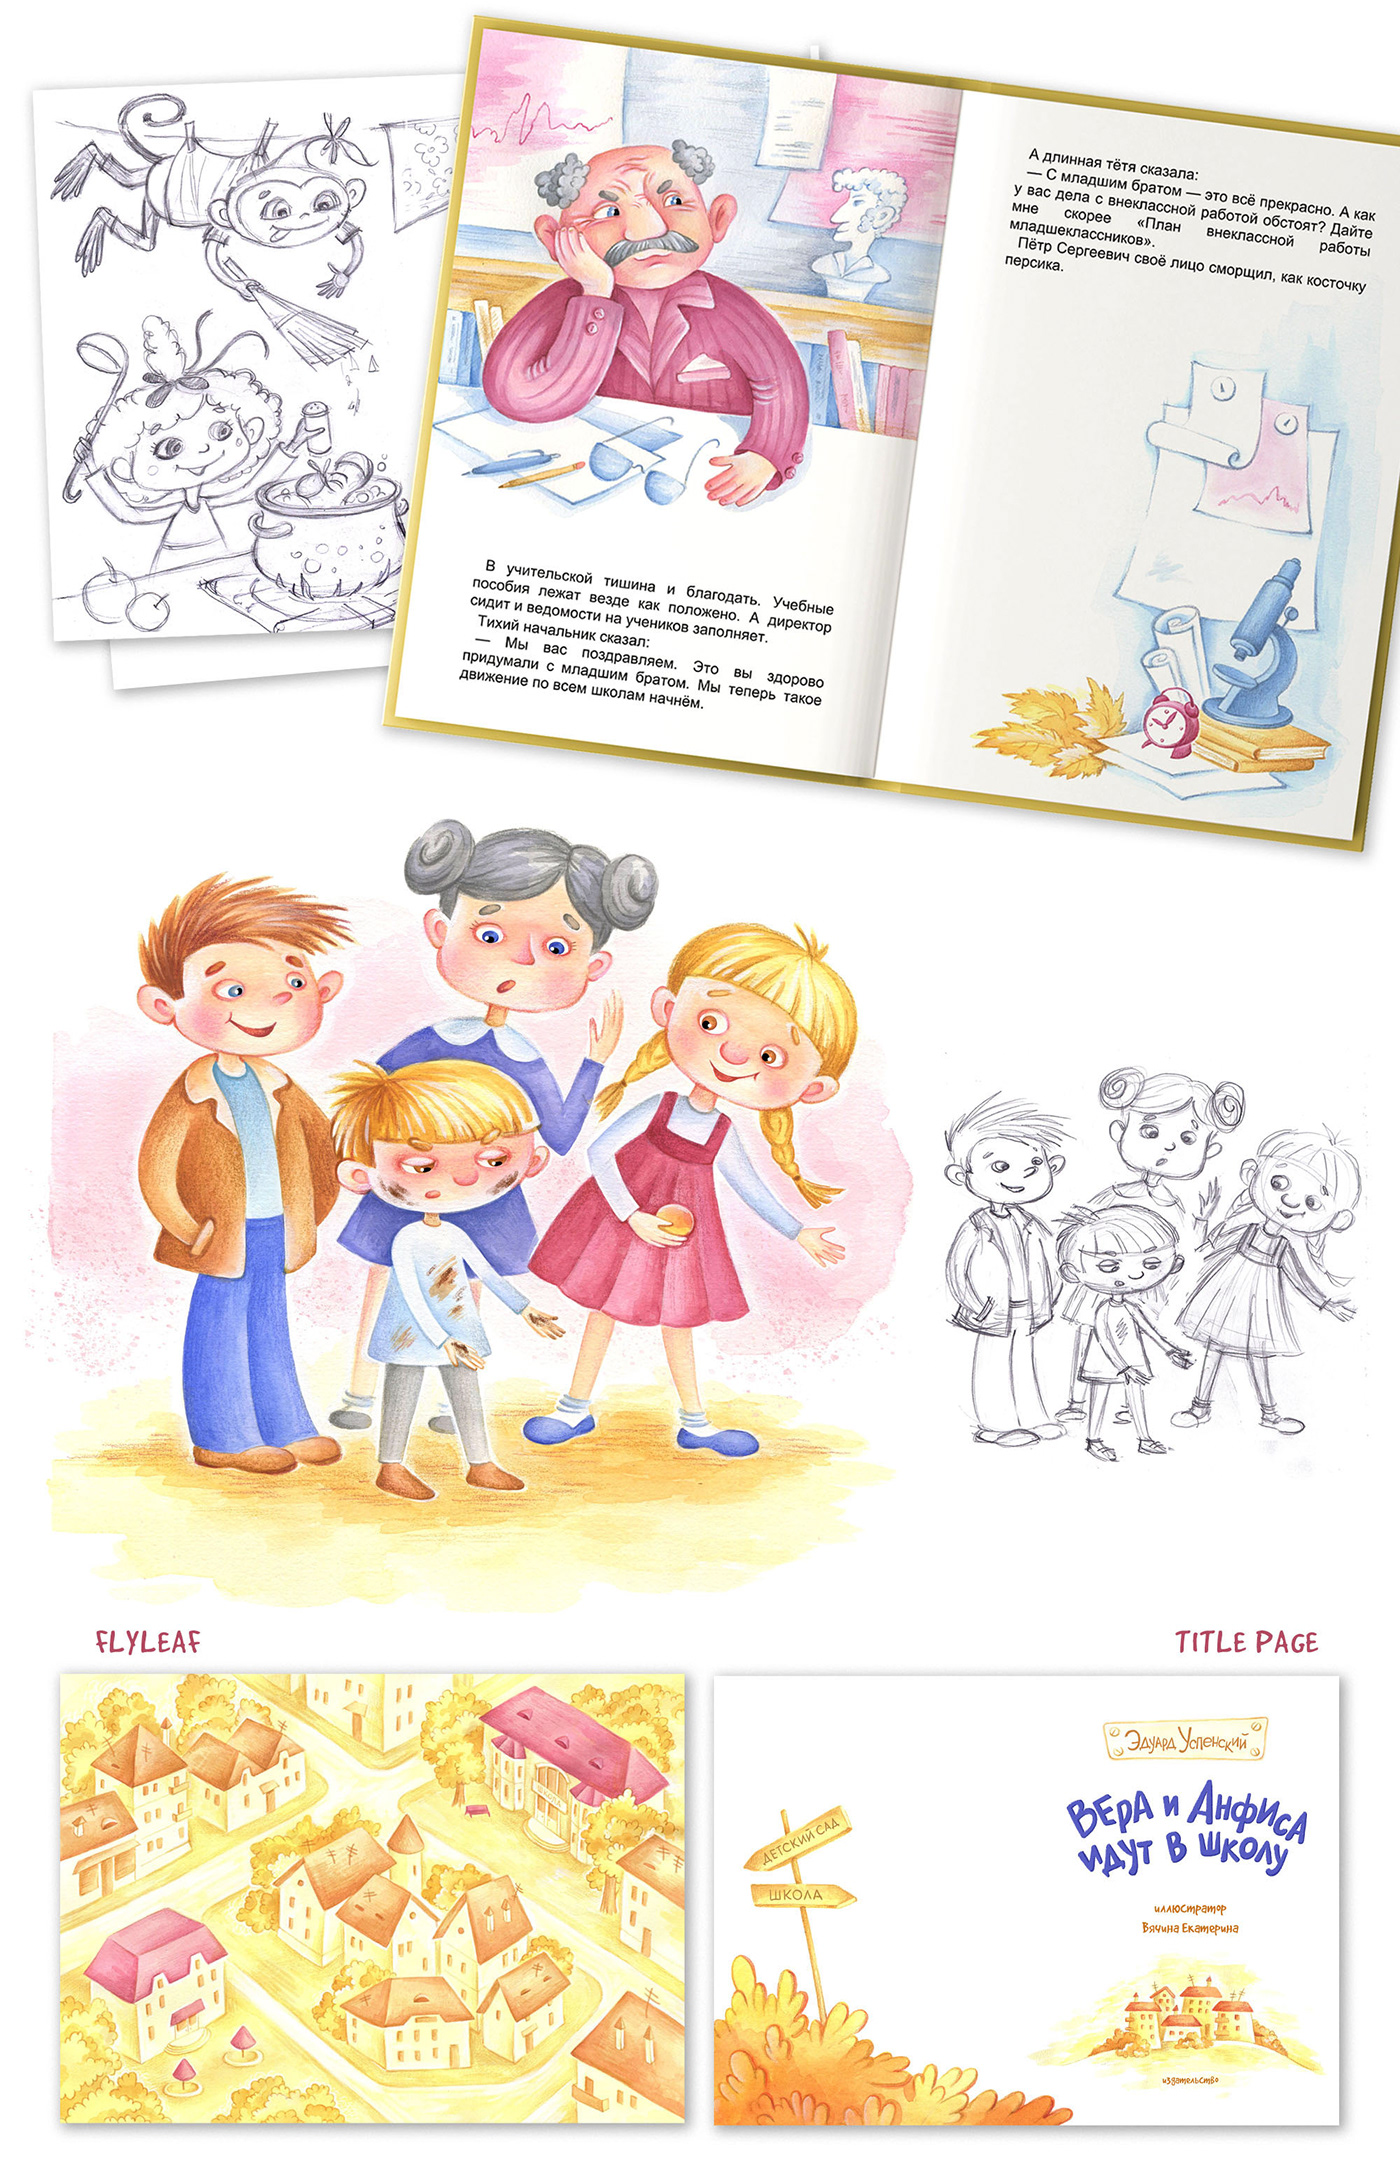 Character design  cover book ILLUSTRATION  photoshop watercolor children illustration children's book Character coverbook